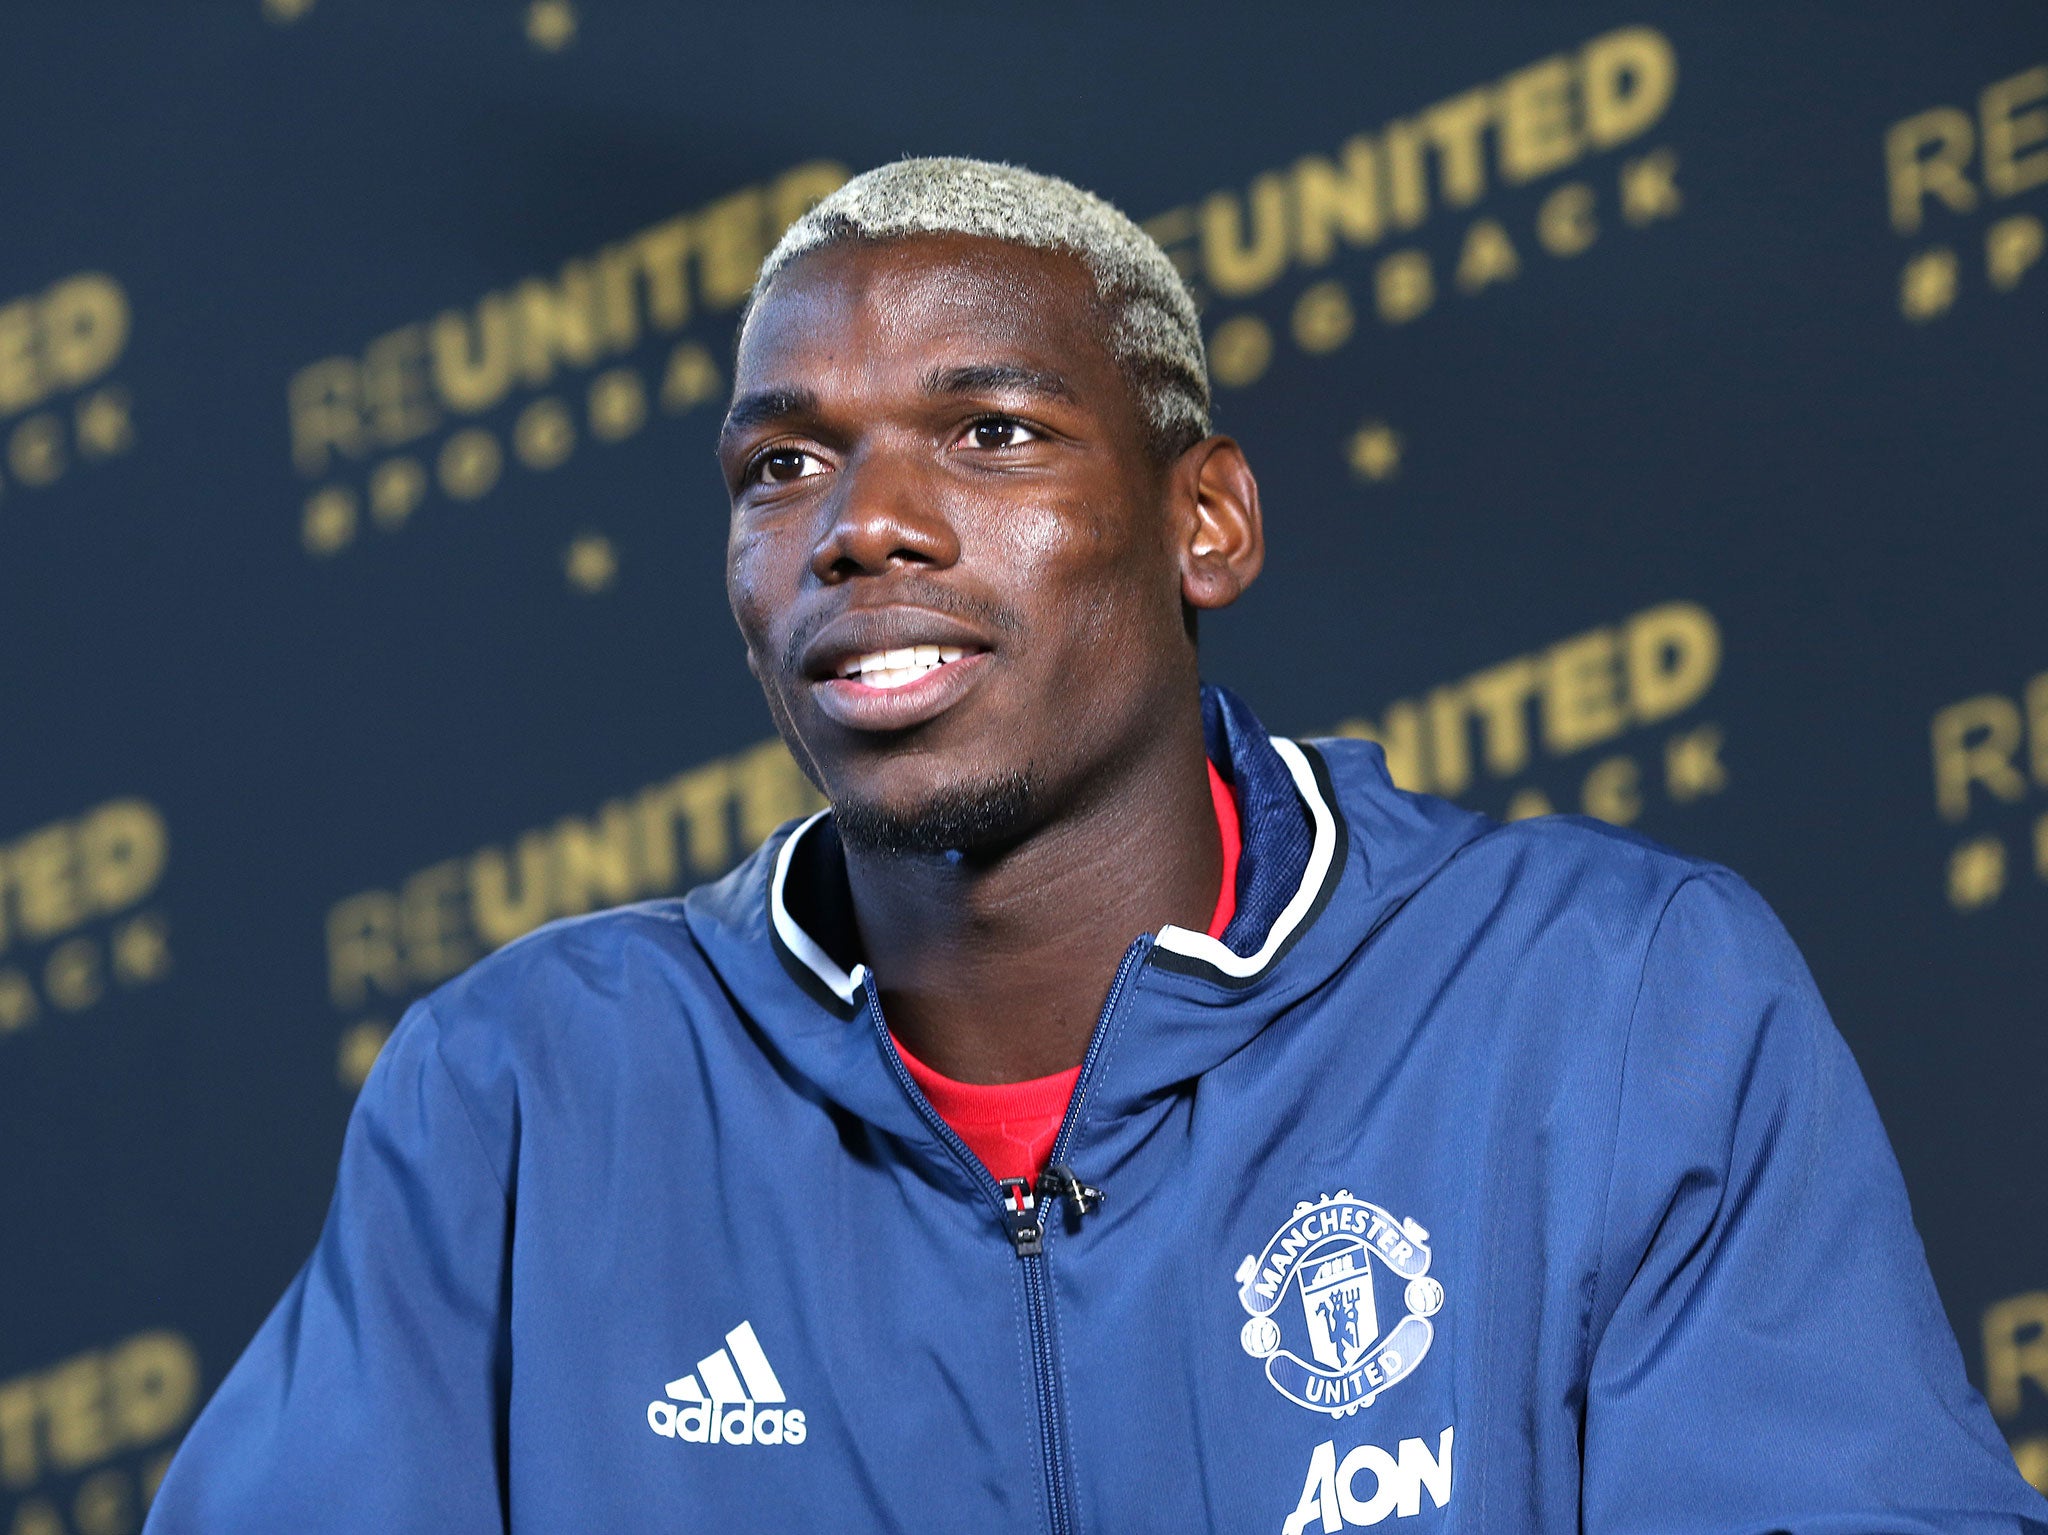 Paul Pogba's move to Manchester United was arguably the biggest transfer story of the summer